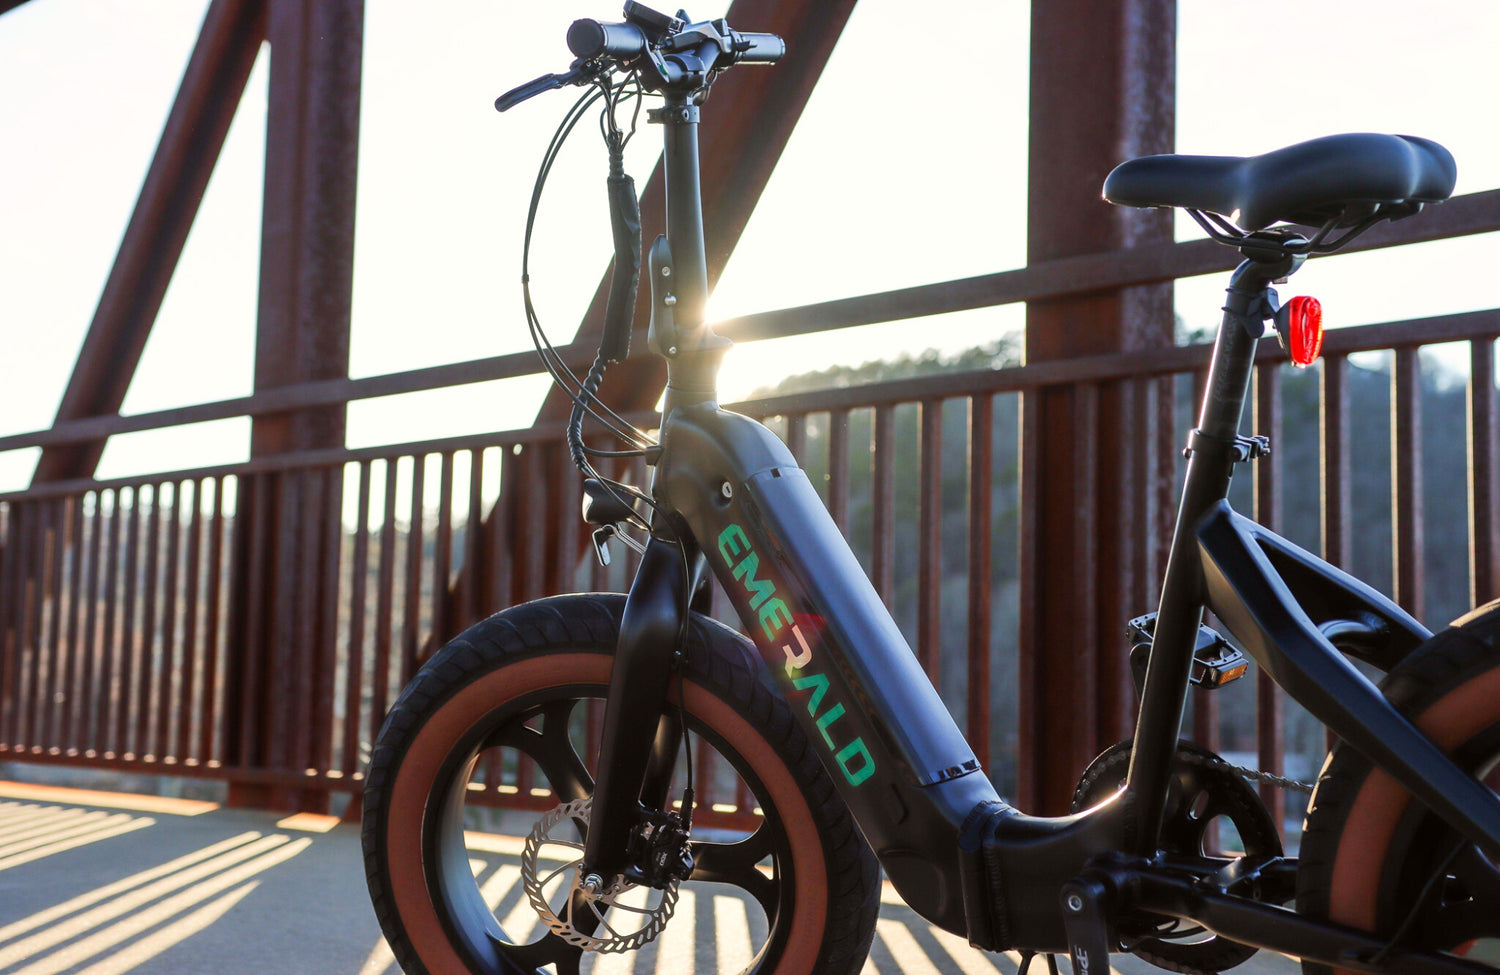 Emerald ebike ready for an outdoor ride by a river